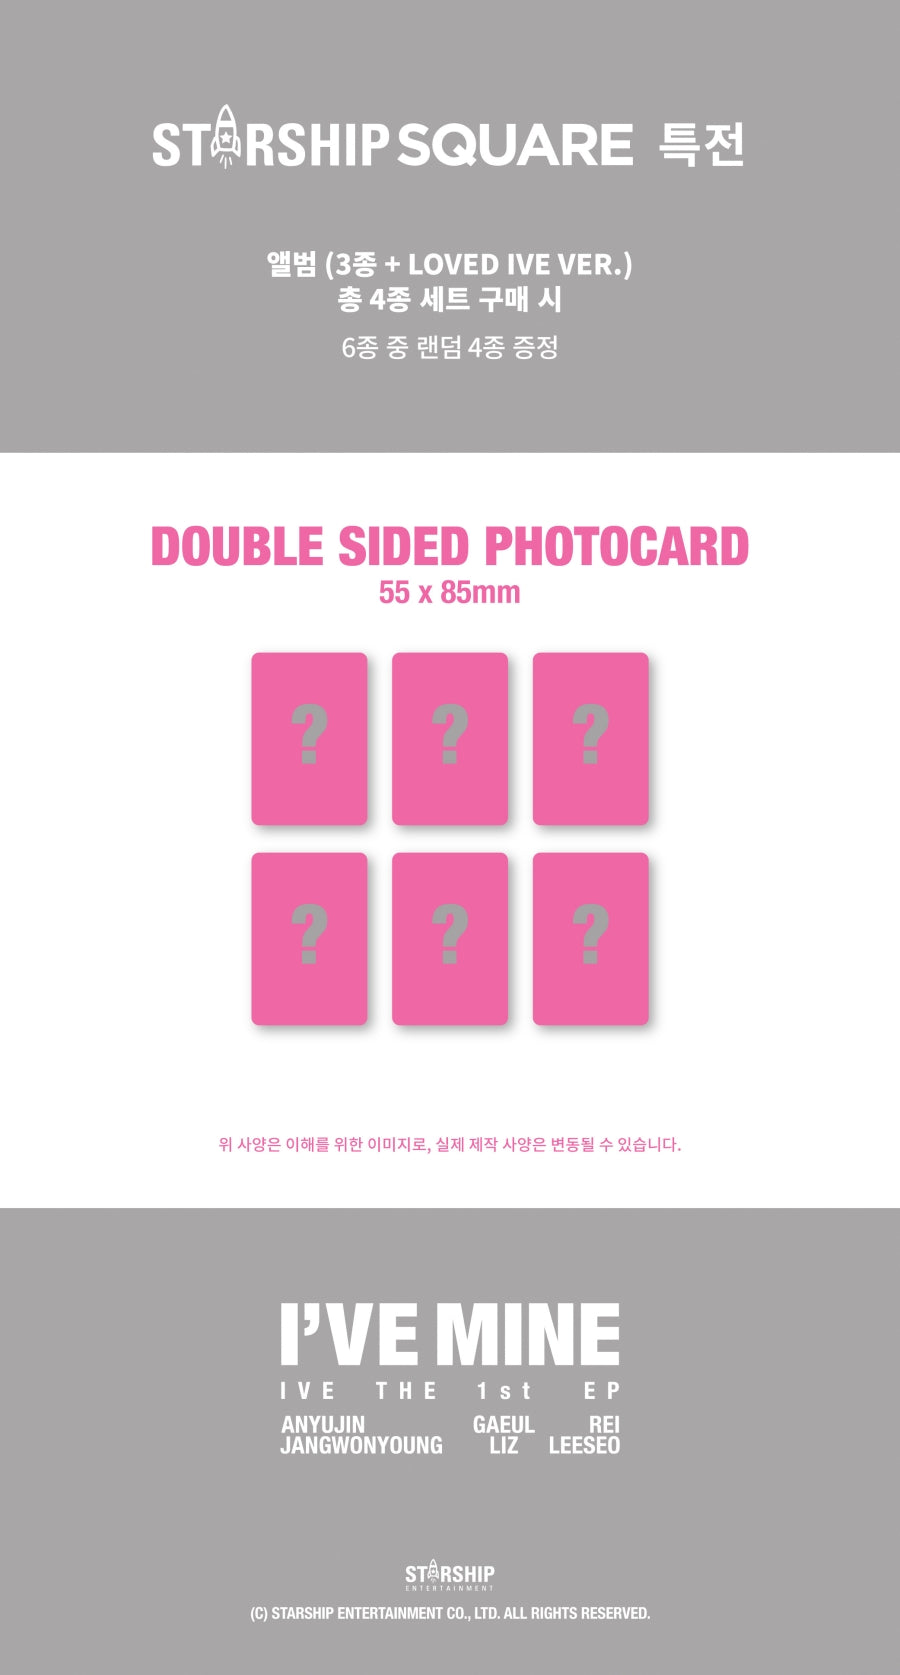 IVE I'VE MINE - EITHER WAY / OFF THE RECORD / BADDIE / LOVED IVE Version Starship Square Gift Photocards